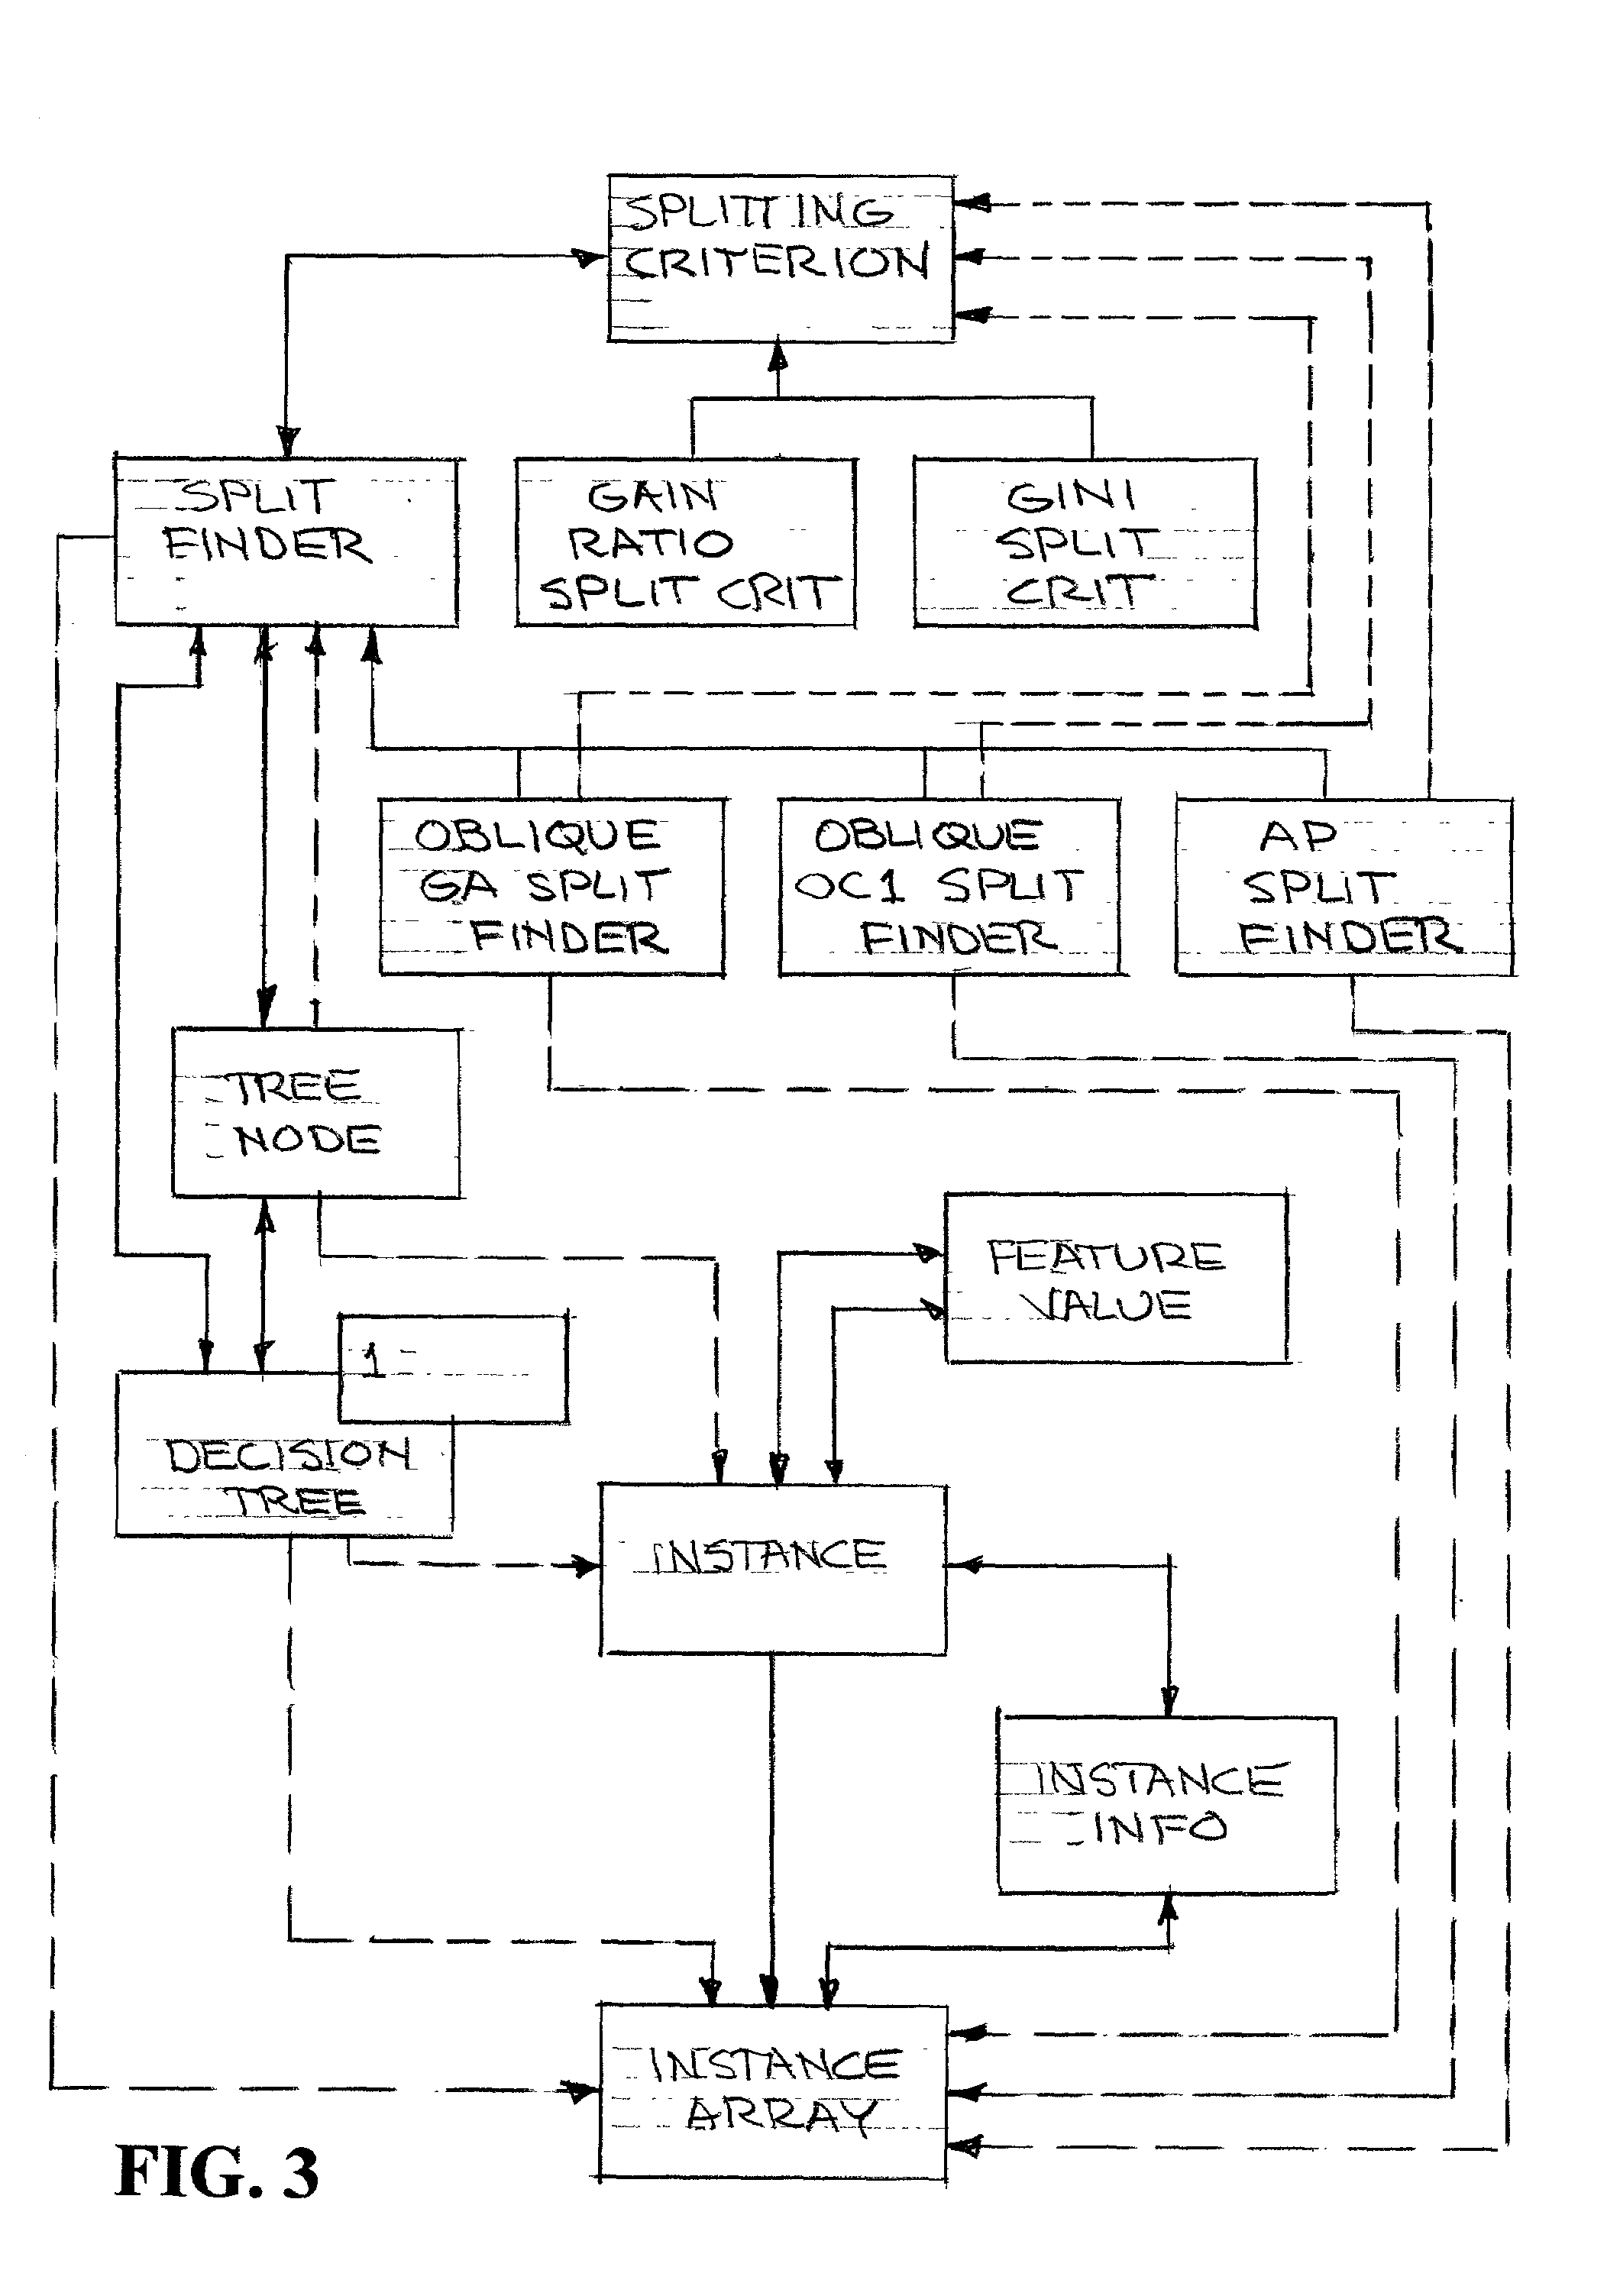 Parallel object-oriented decision tree system